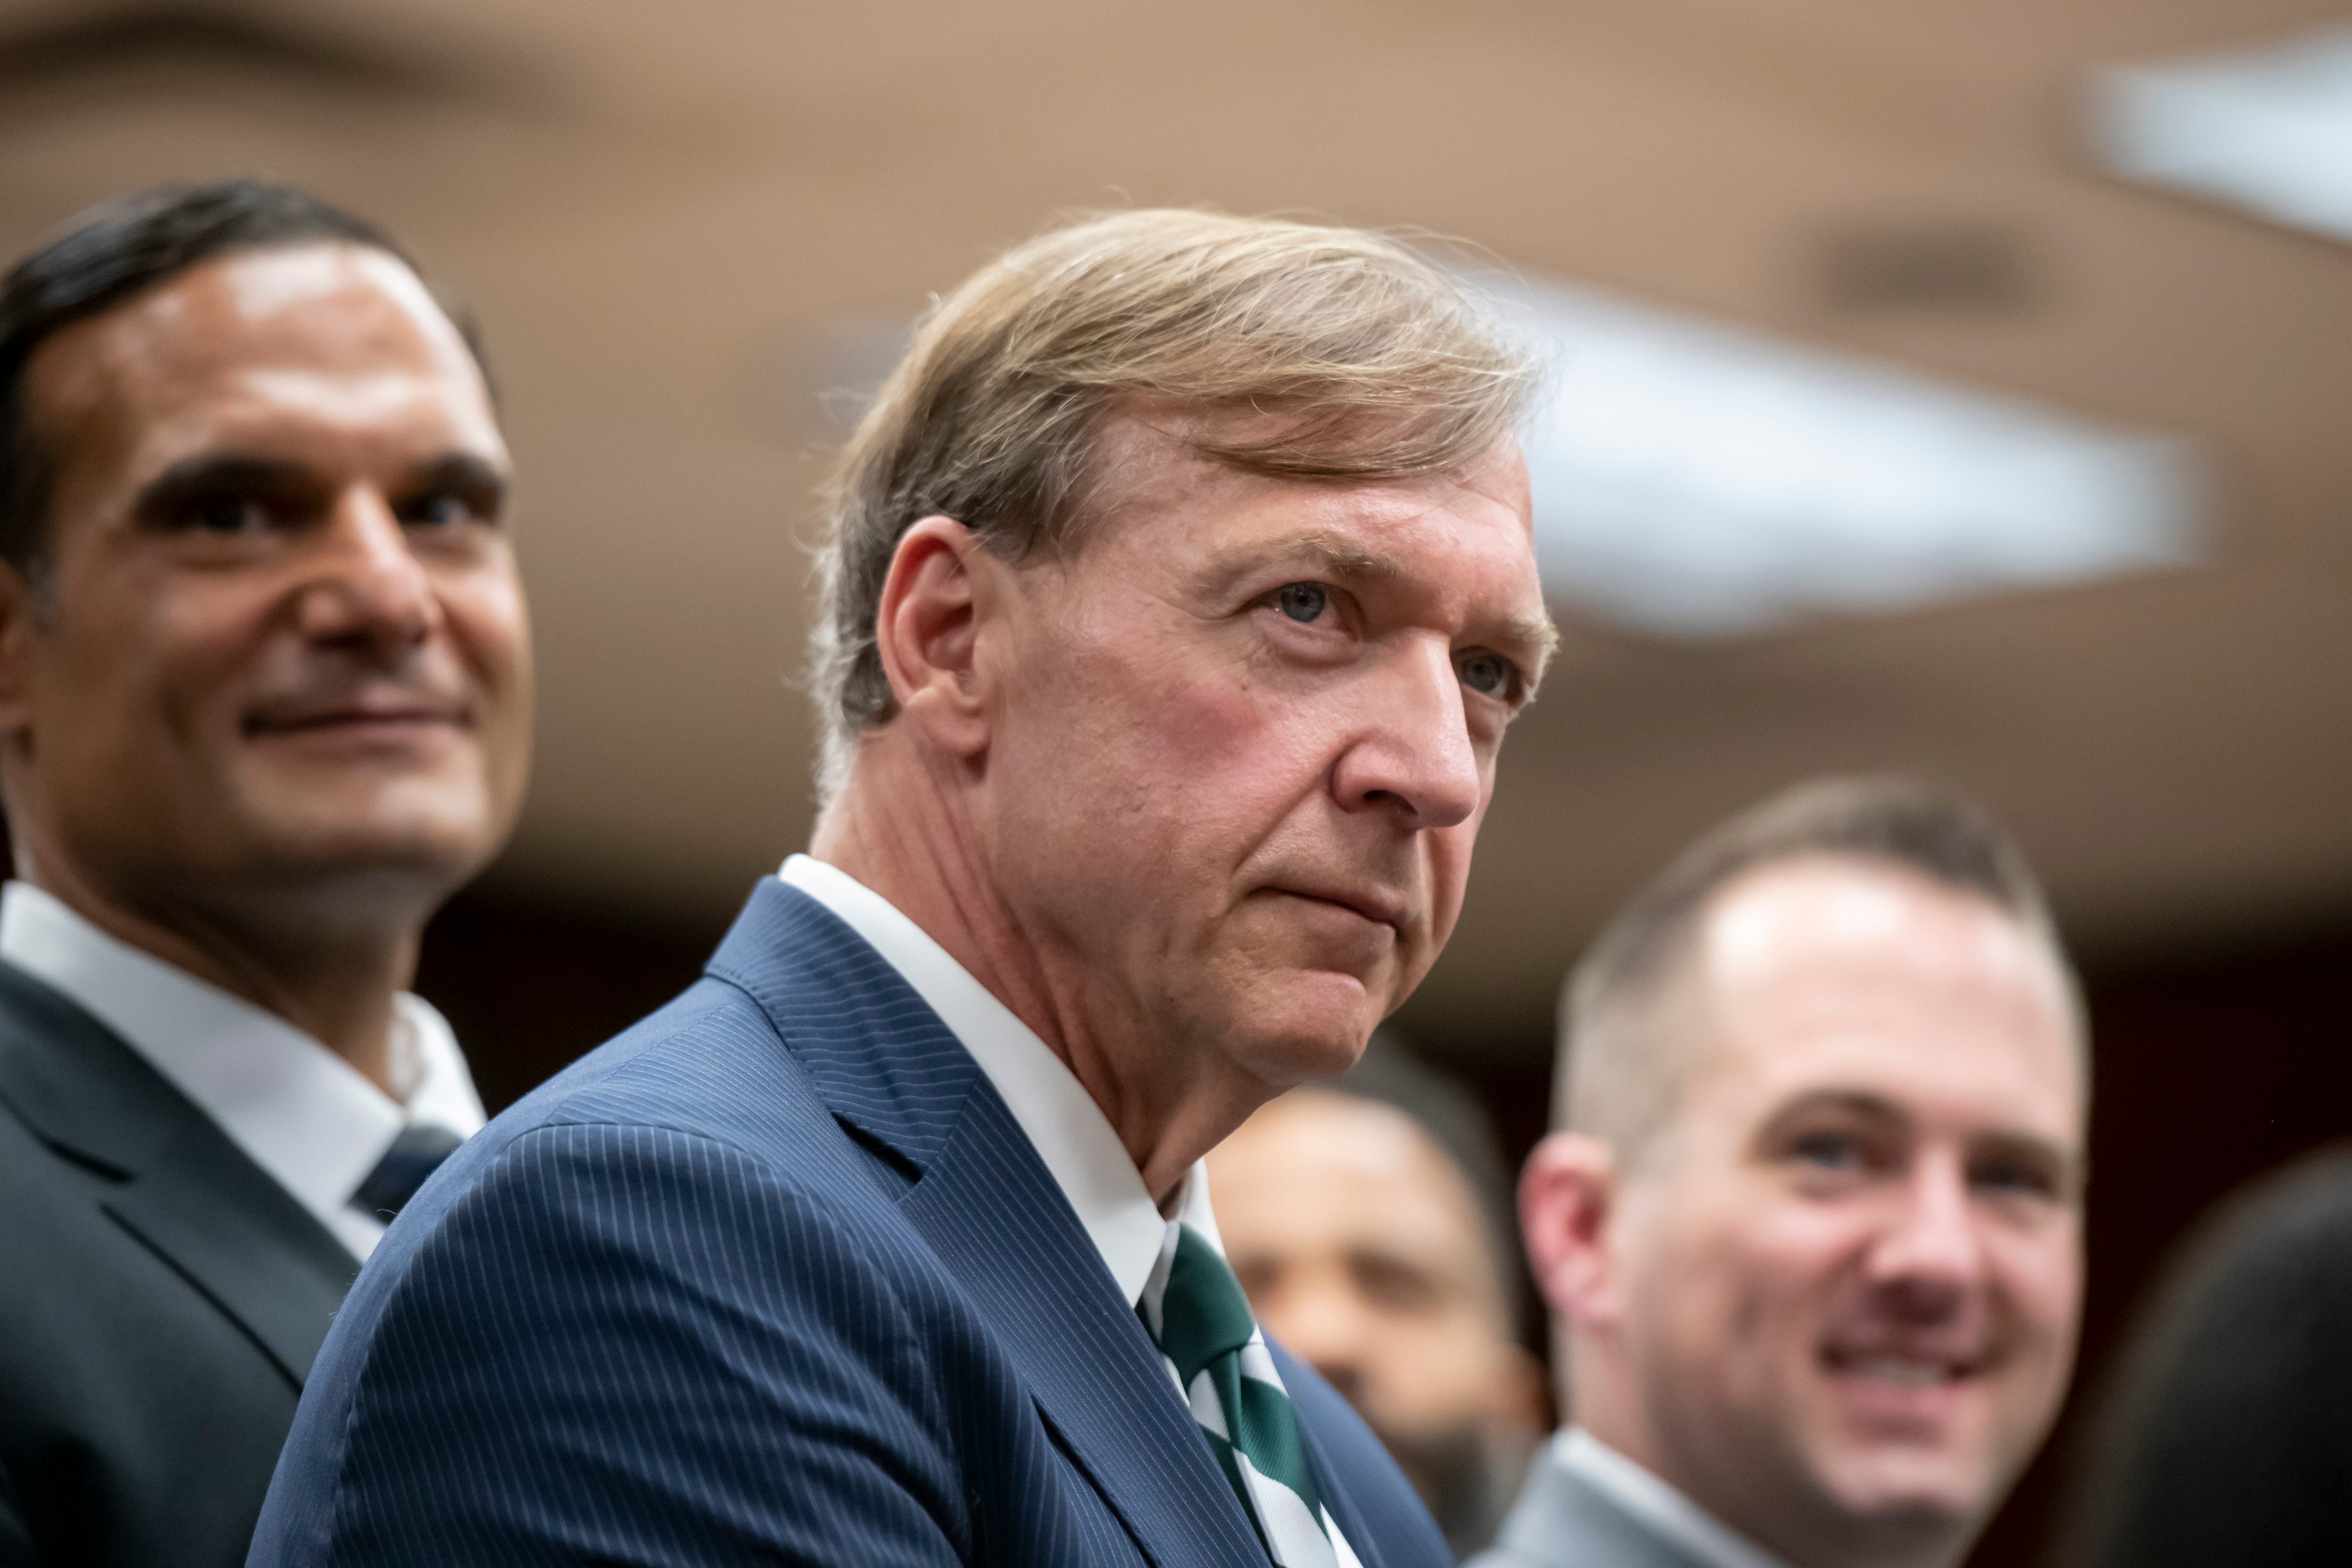 Samuel Stanley Jr. participates in a question and answer session after being named Michigan State University's 21st president, May 28, 2019.